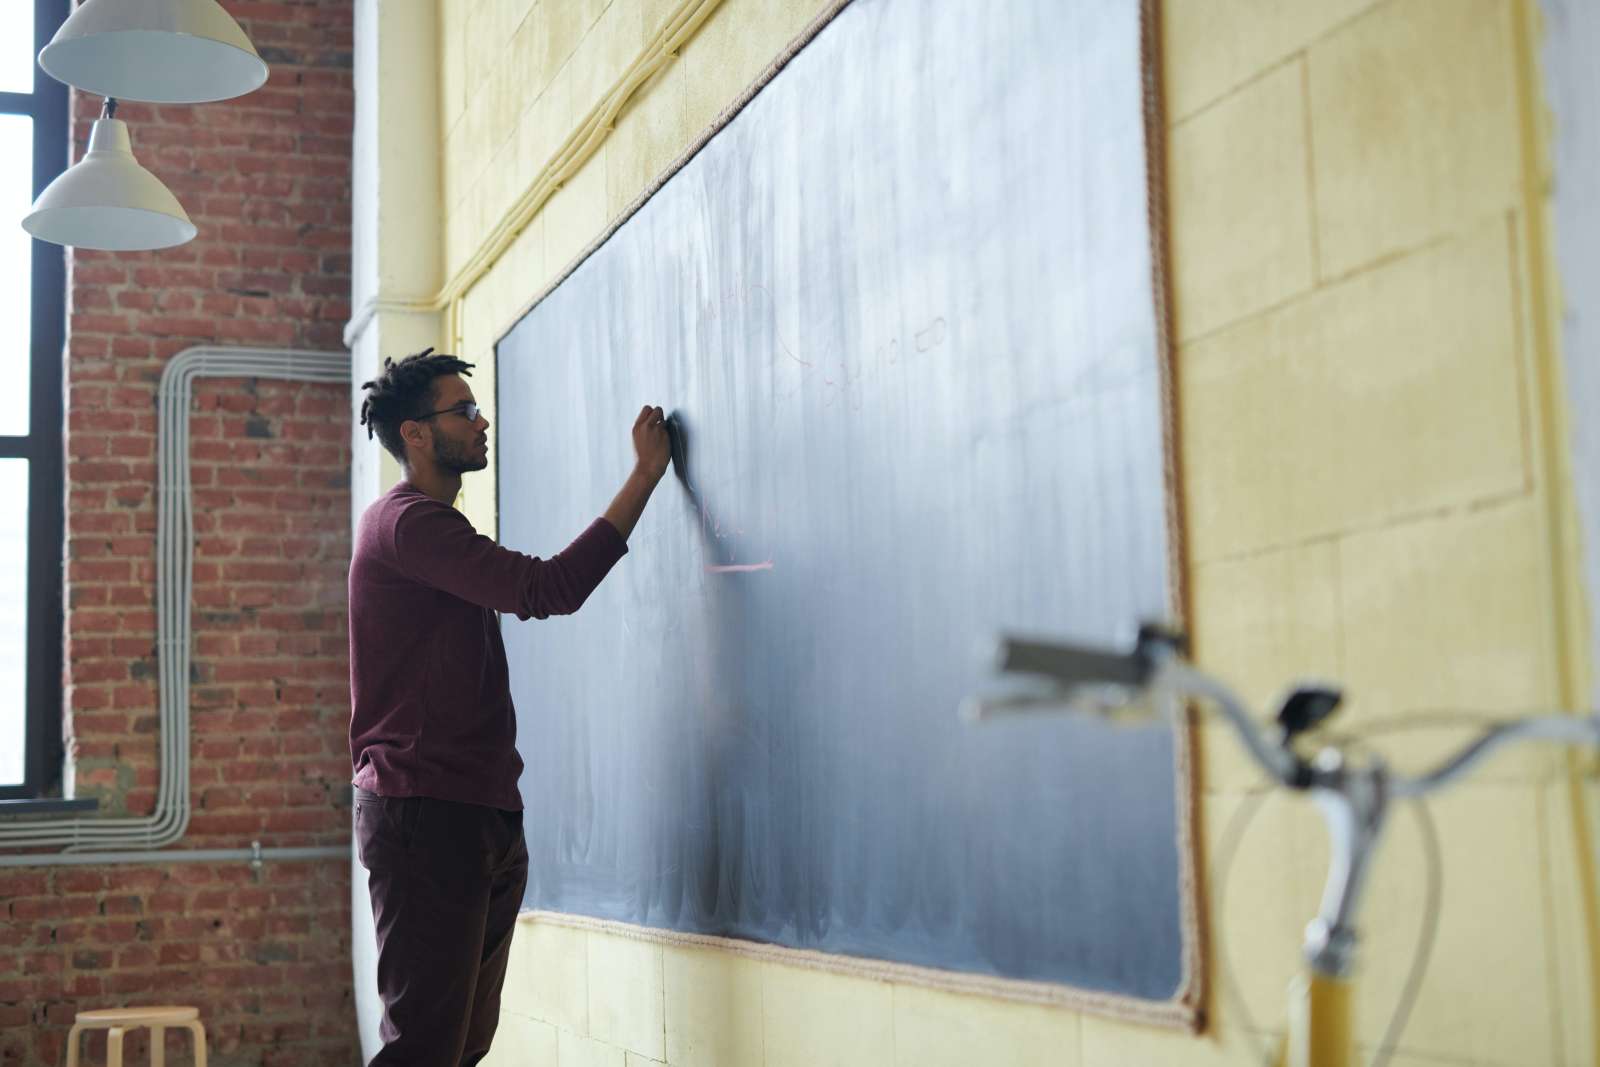 A person writing on a chalkboard in a classroom.